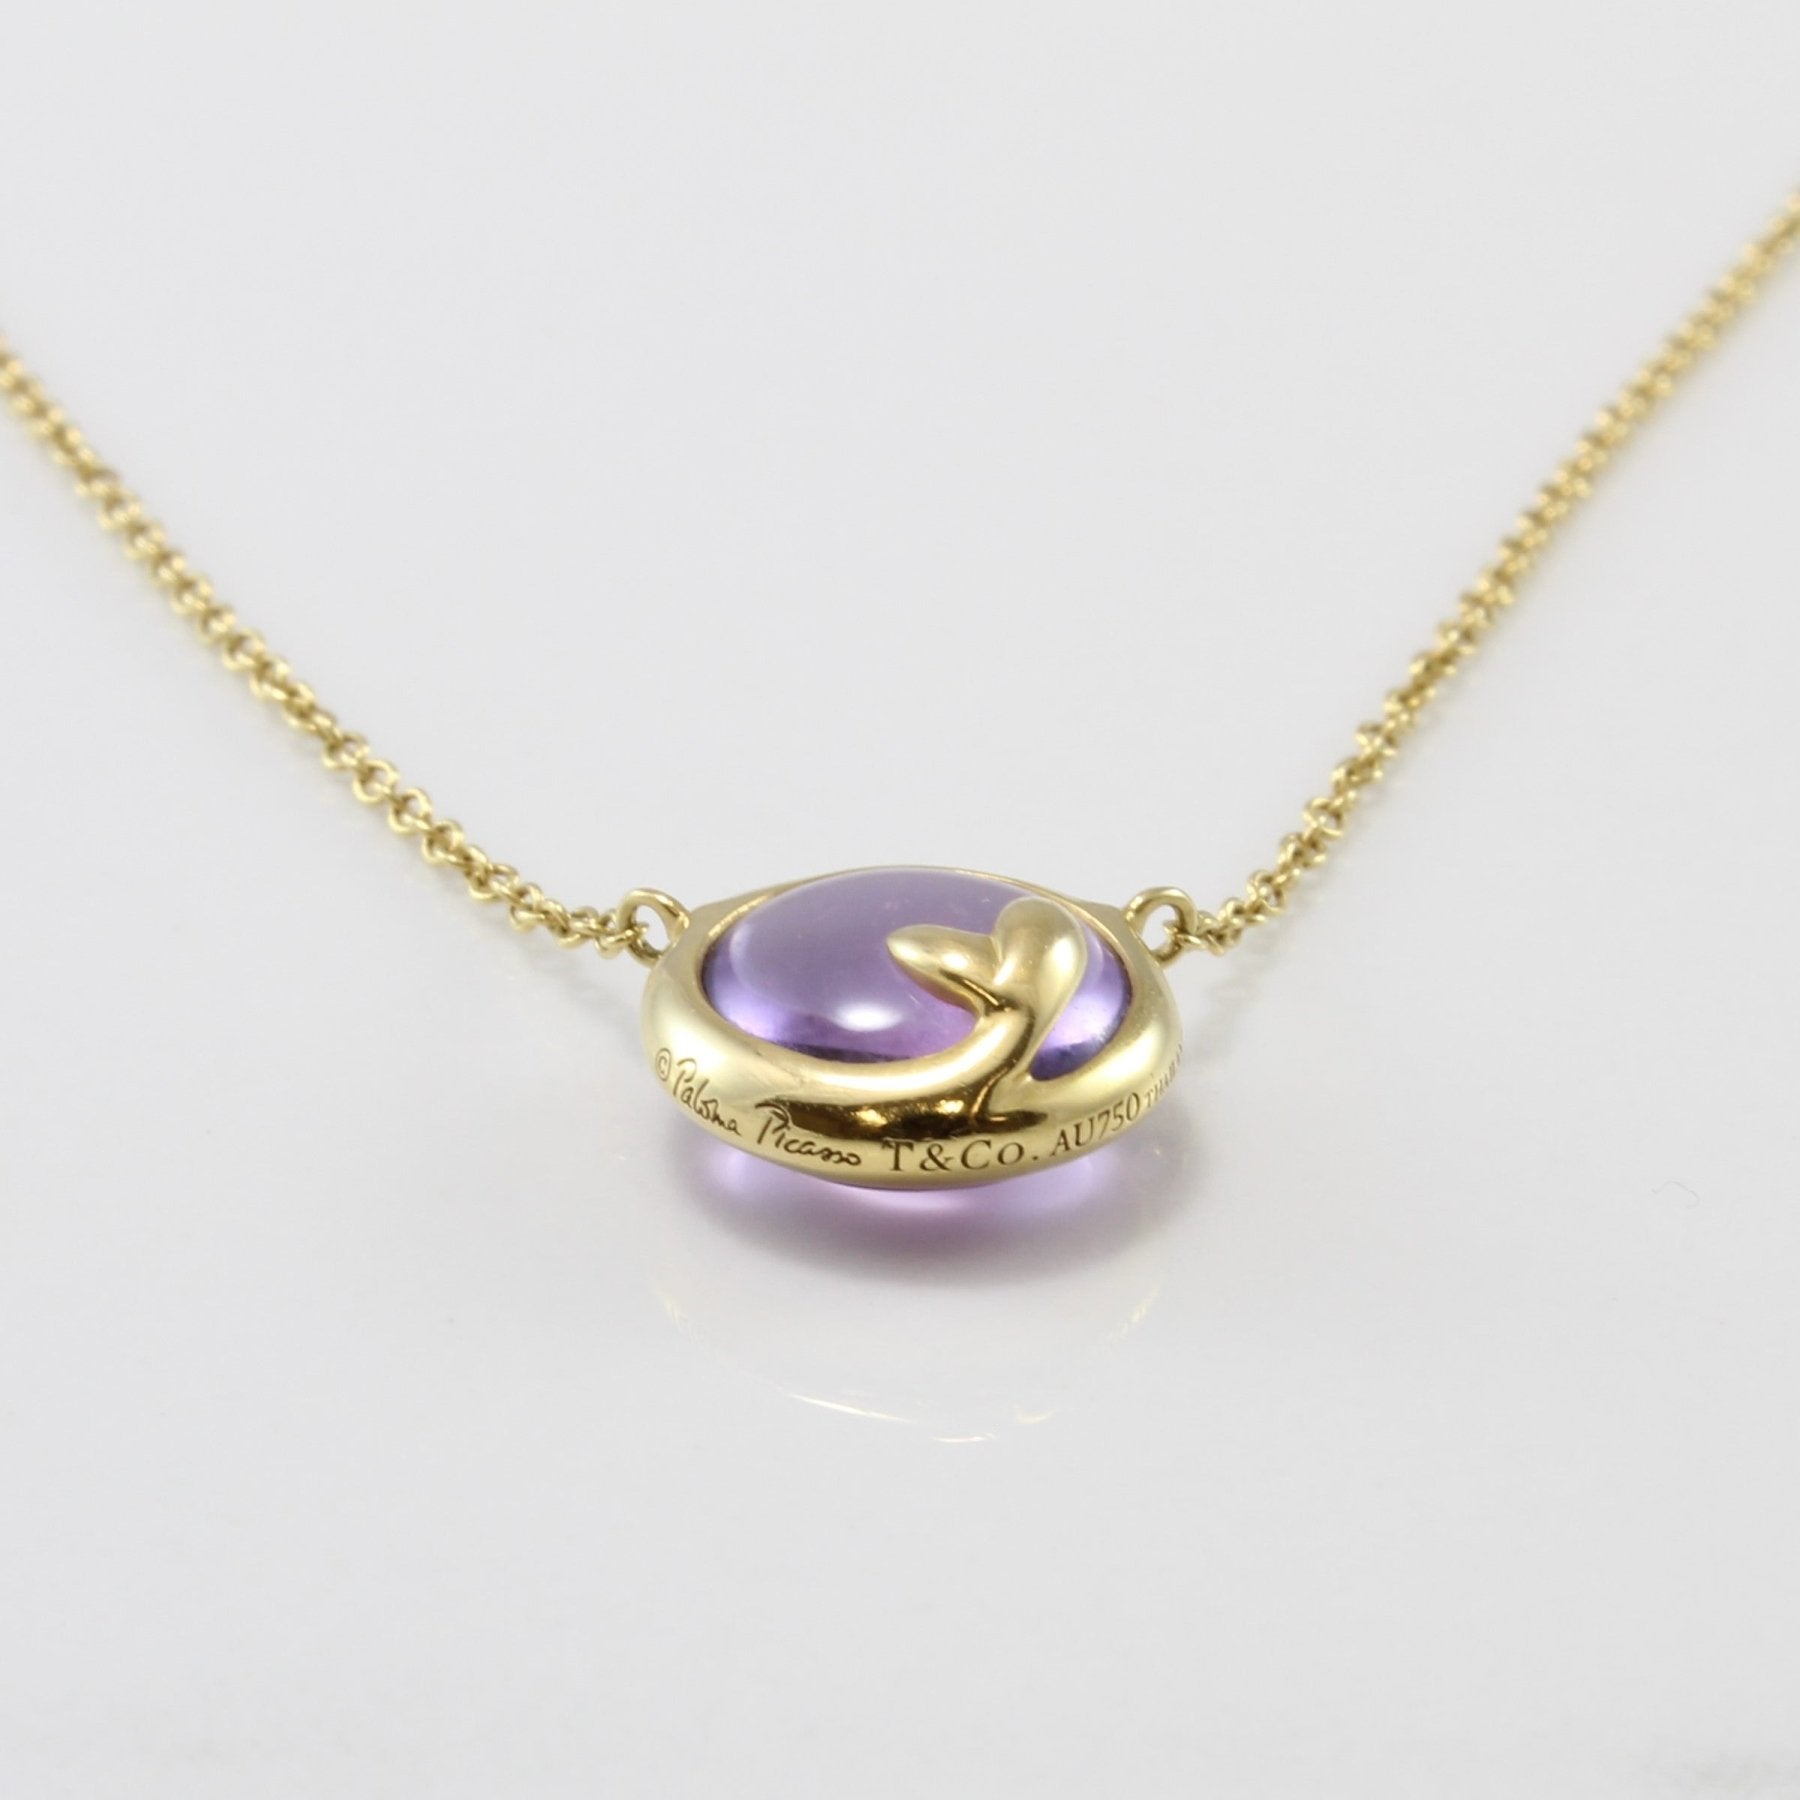 'Tiffany & Co.' Paloma Picasso Olive Leaf Amethyst Necklace | 3.00 ct | 18